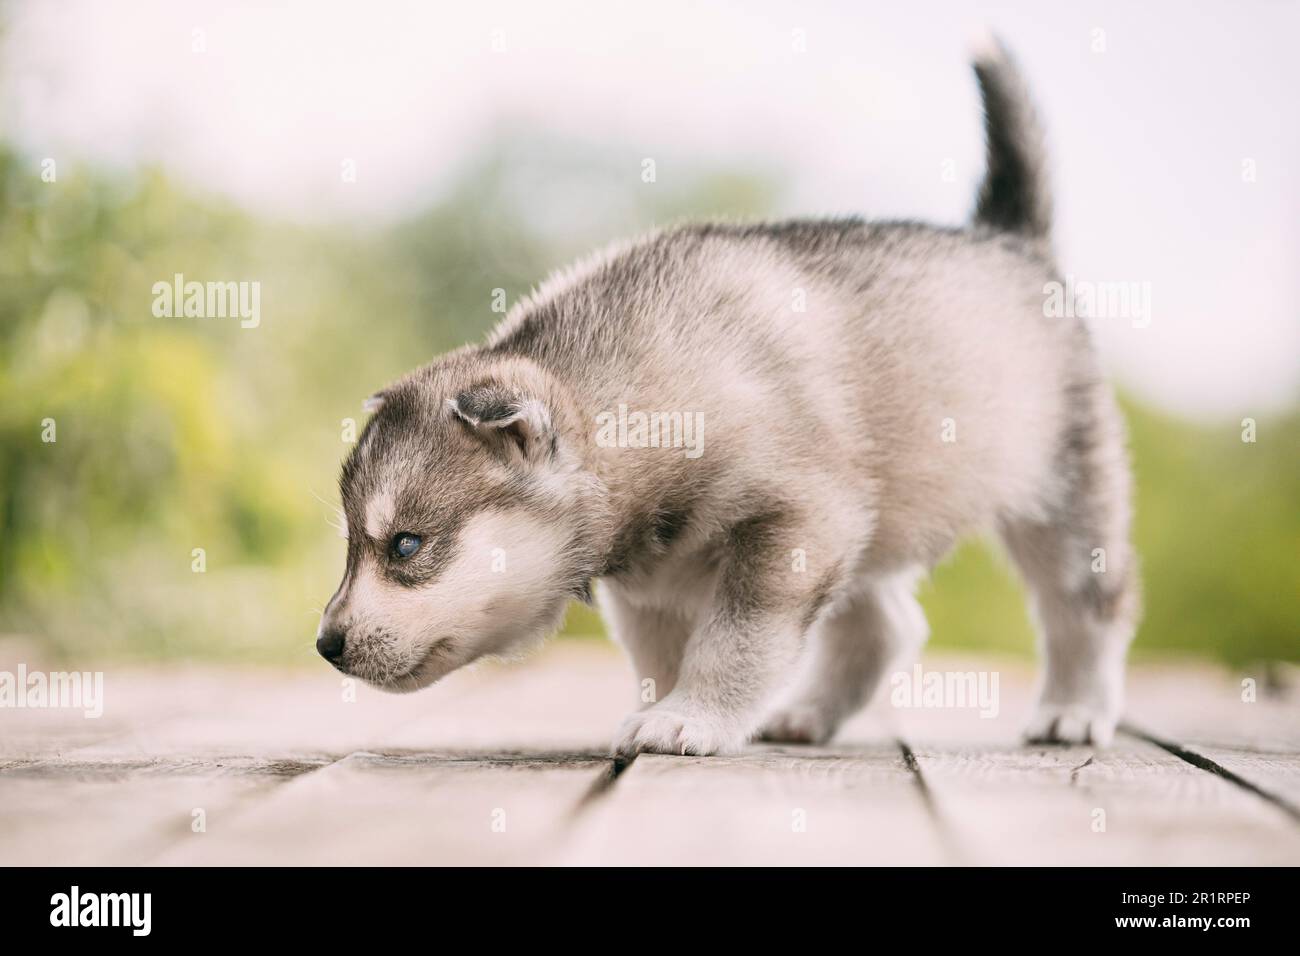 Four-week-old Husky Puppy Of White-gray Color Sitting On Wooden Ground And Sniffs It. Stock Photo